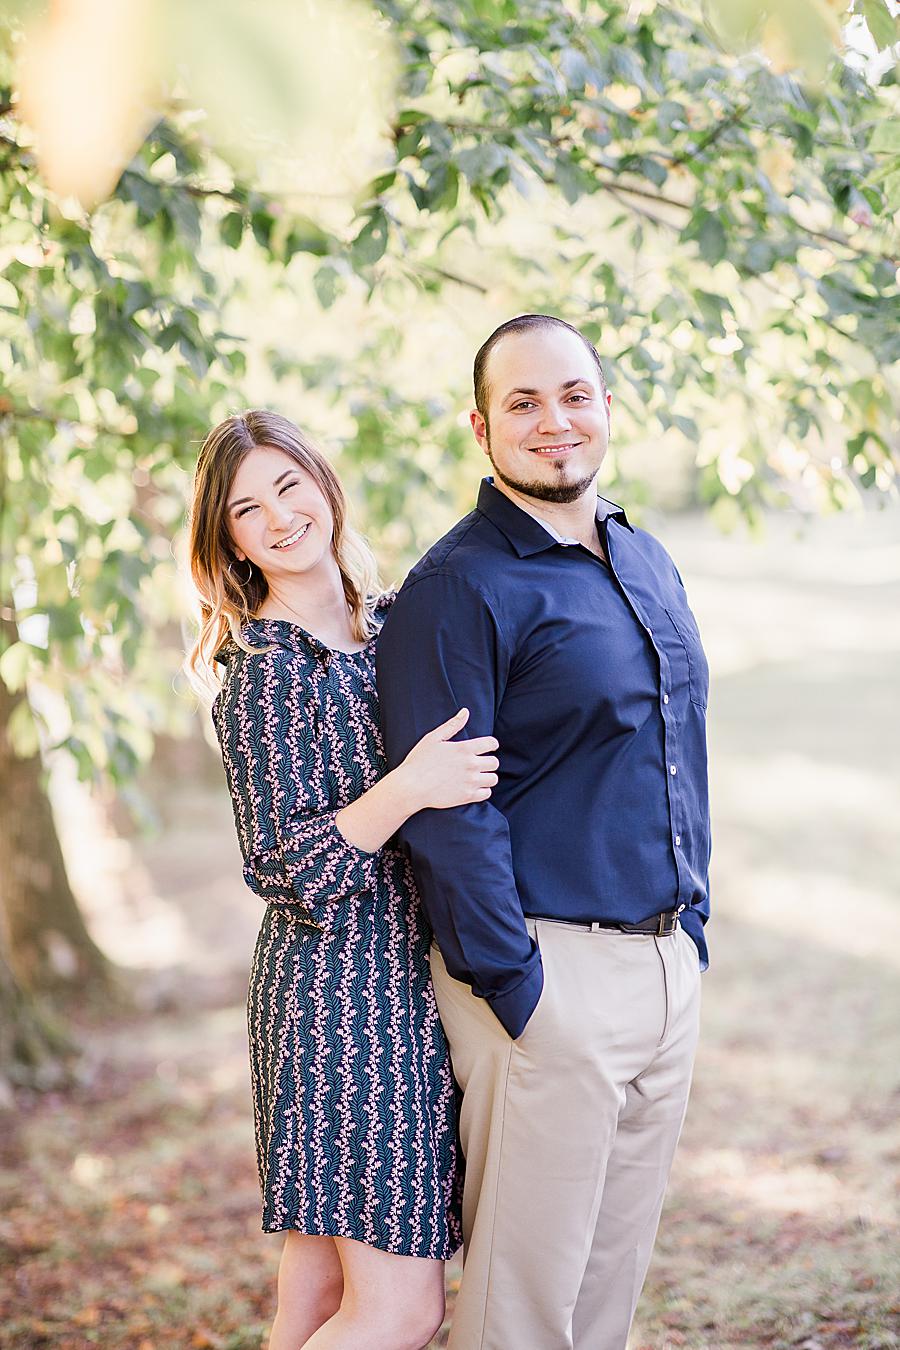 Hand on arm at this Apple Barn Engagement by Knoxville Wedding Photographer, Amanda May Photos.